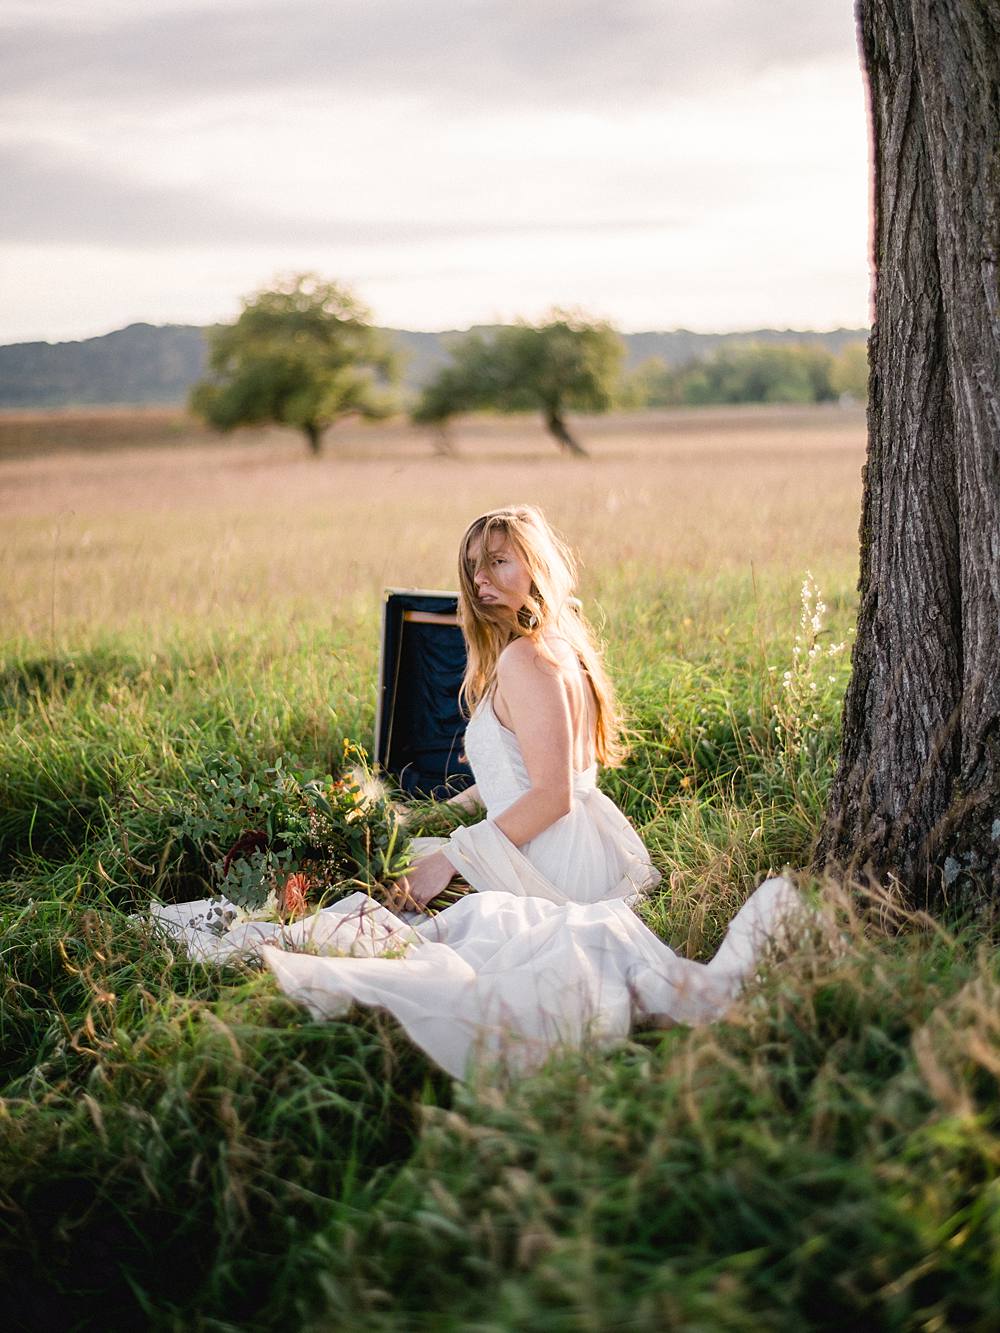 northern michigan bride in a field photographed by michigan wedding photographer brian d smith photography on kodak film